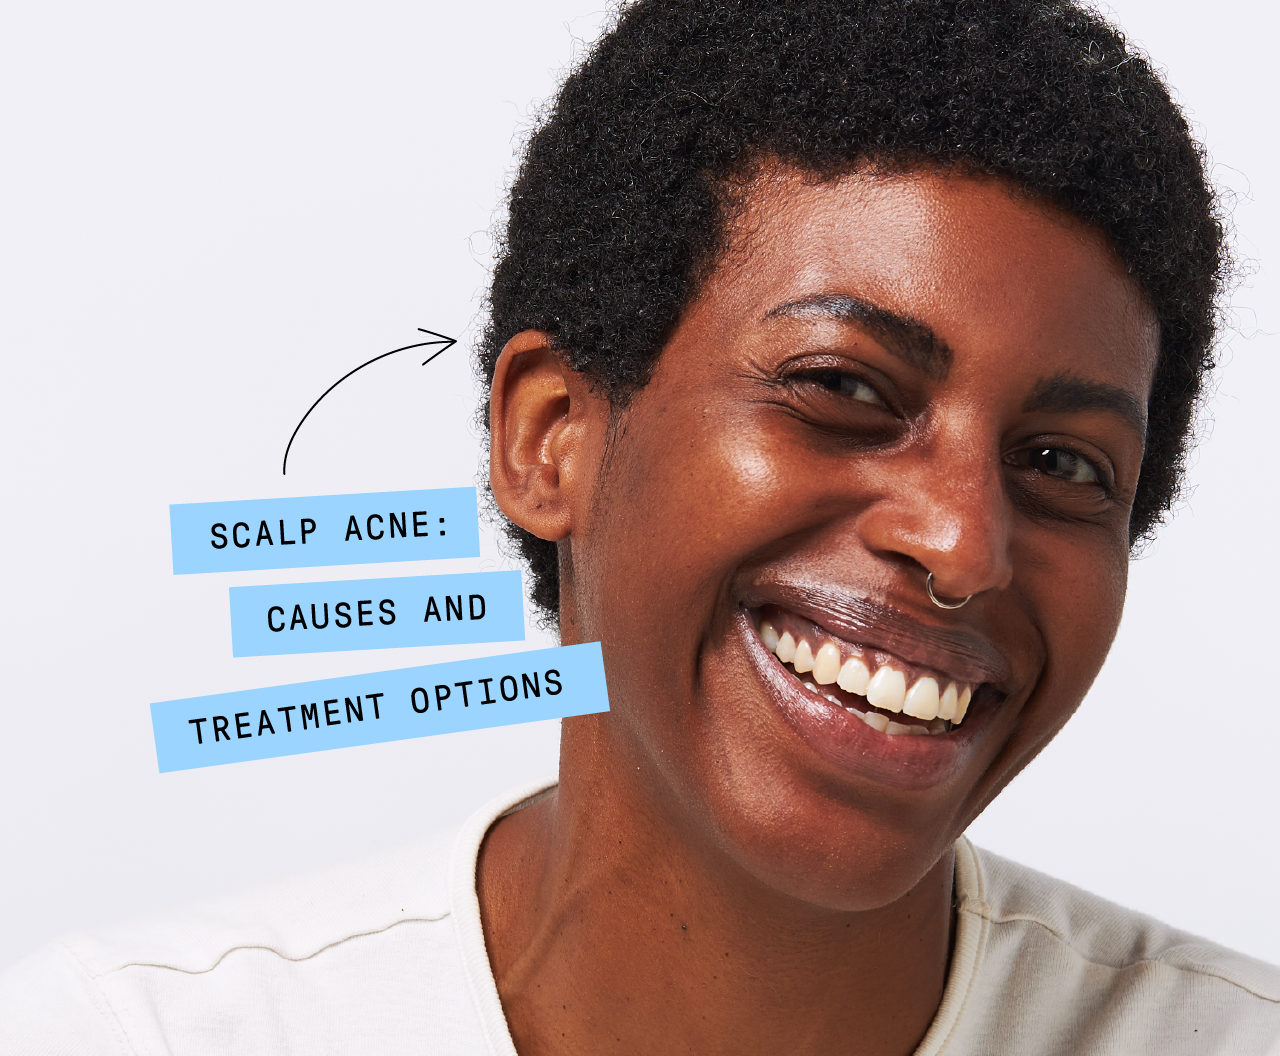 Scalp Acne: Causes and Treatment Options | Apostrophe